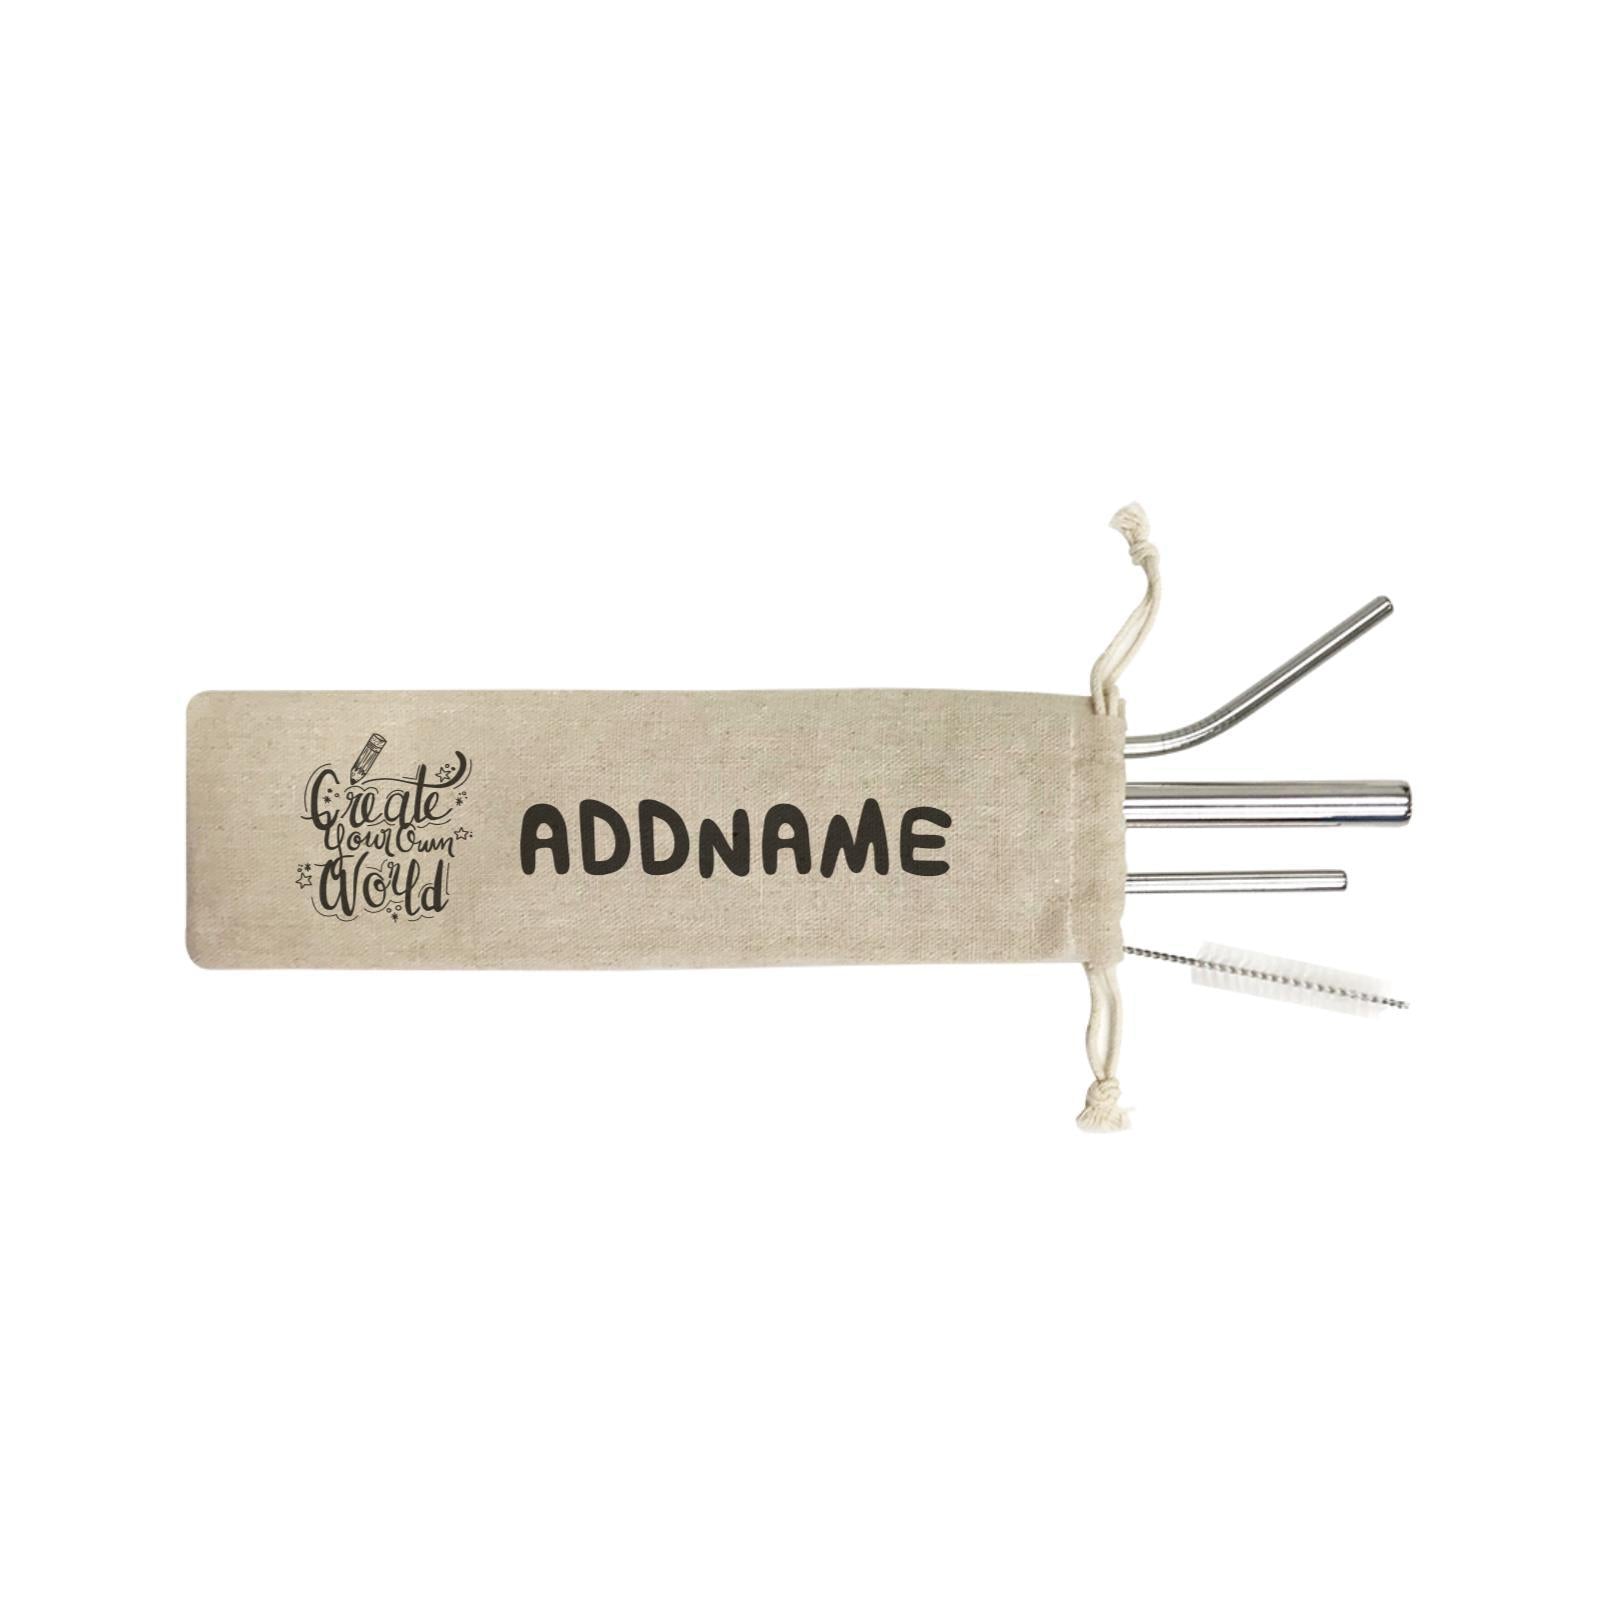 Children's Day Gift Series Create Your Own World Addname SB 4-in-1 Stainless Steel Straw Set In a Satchel